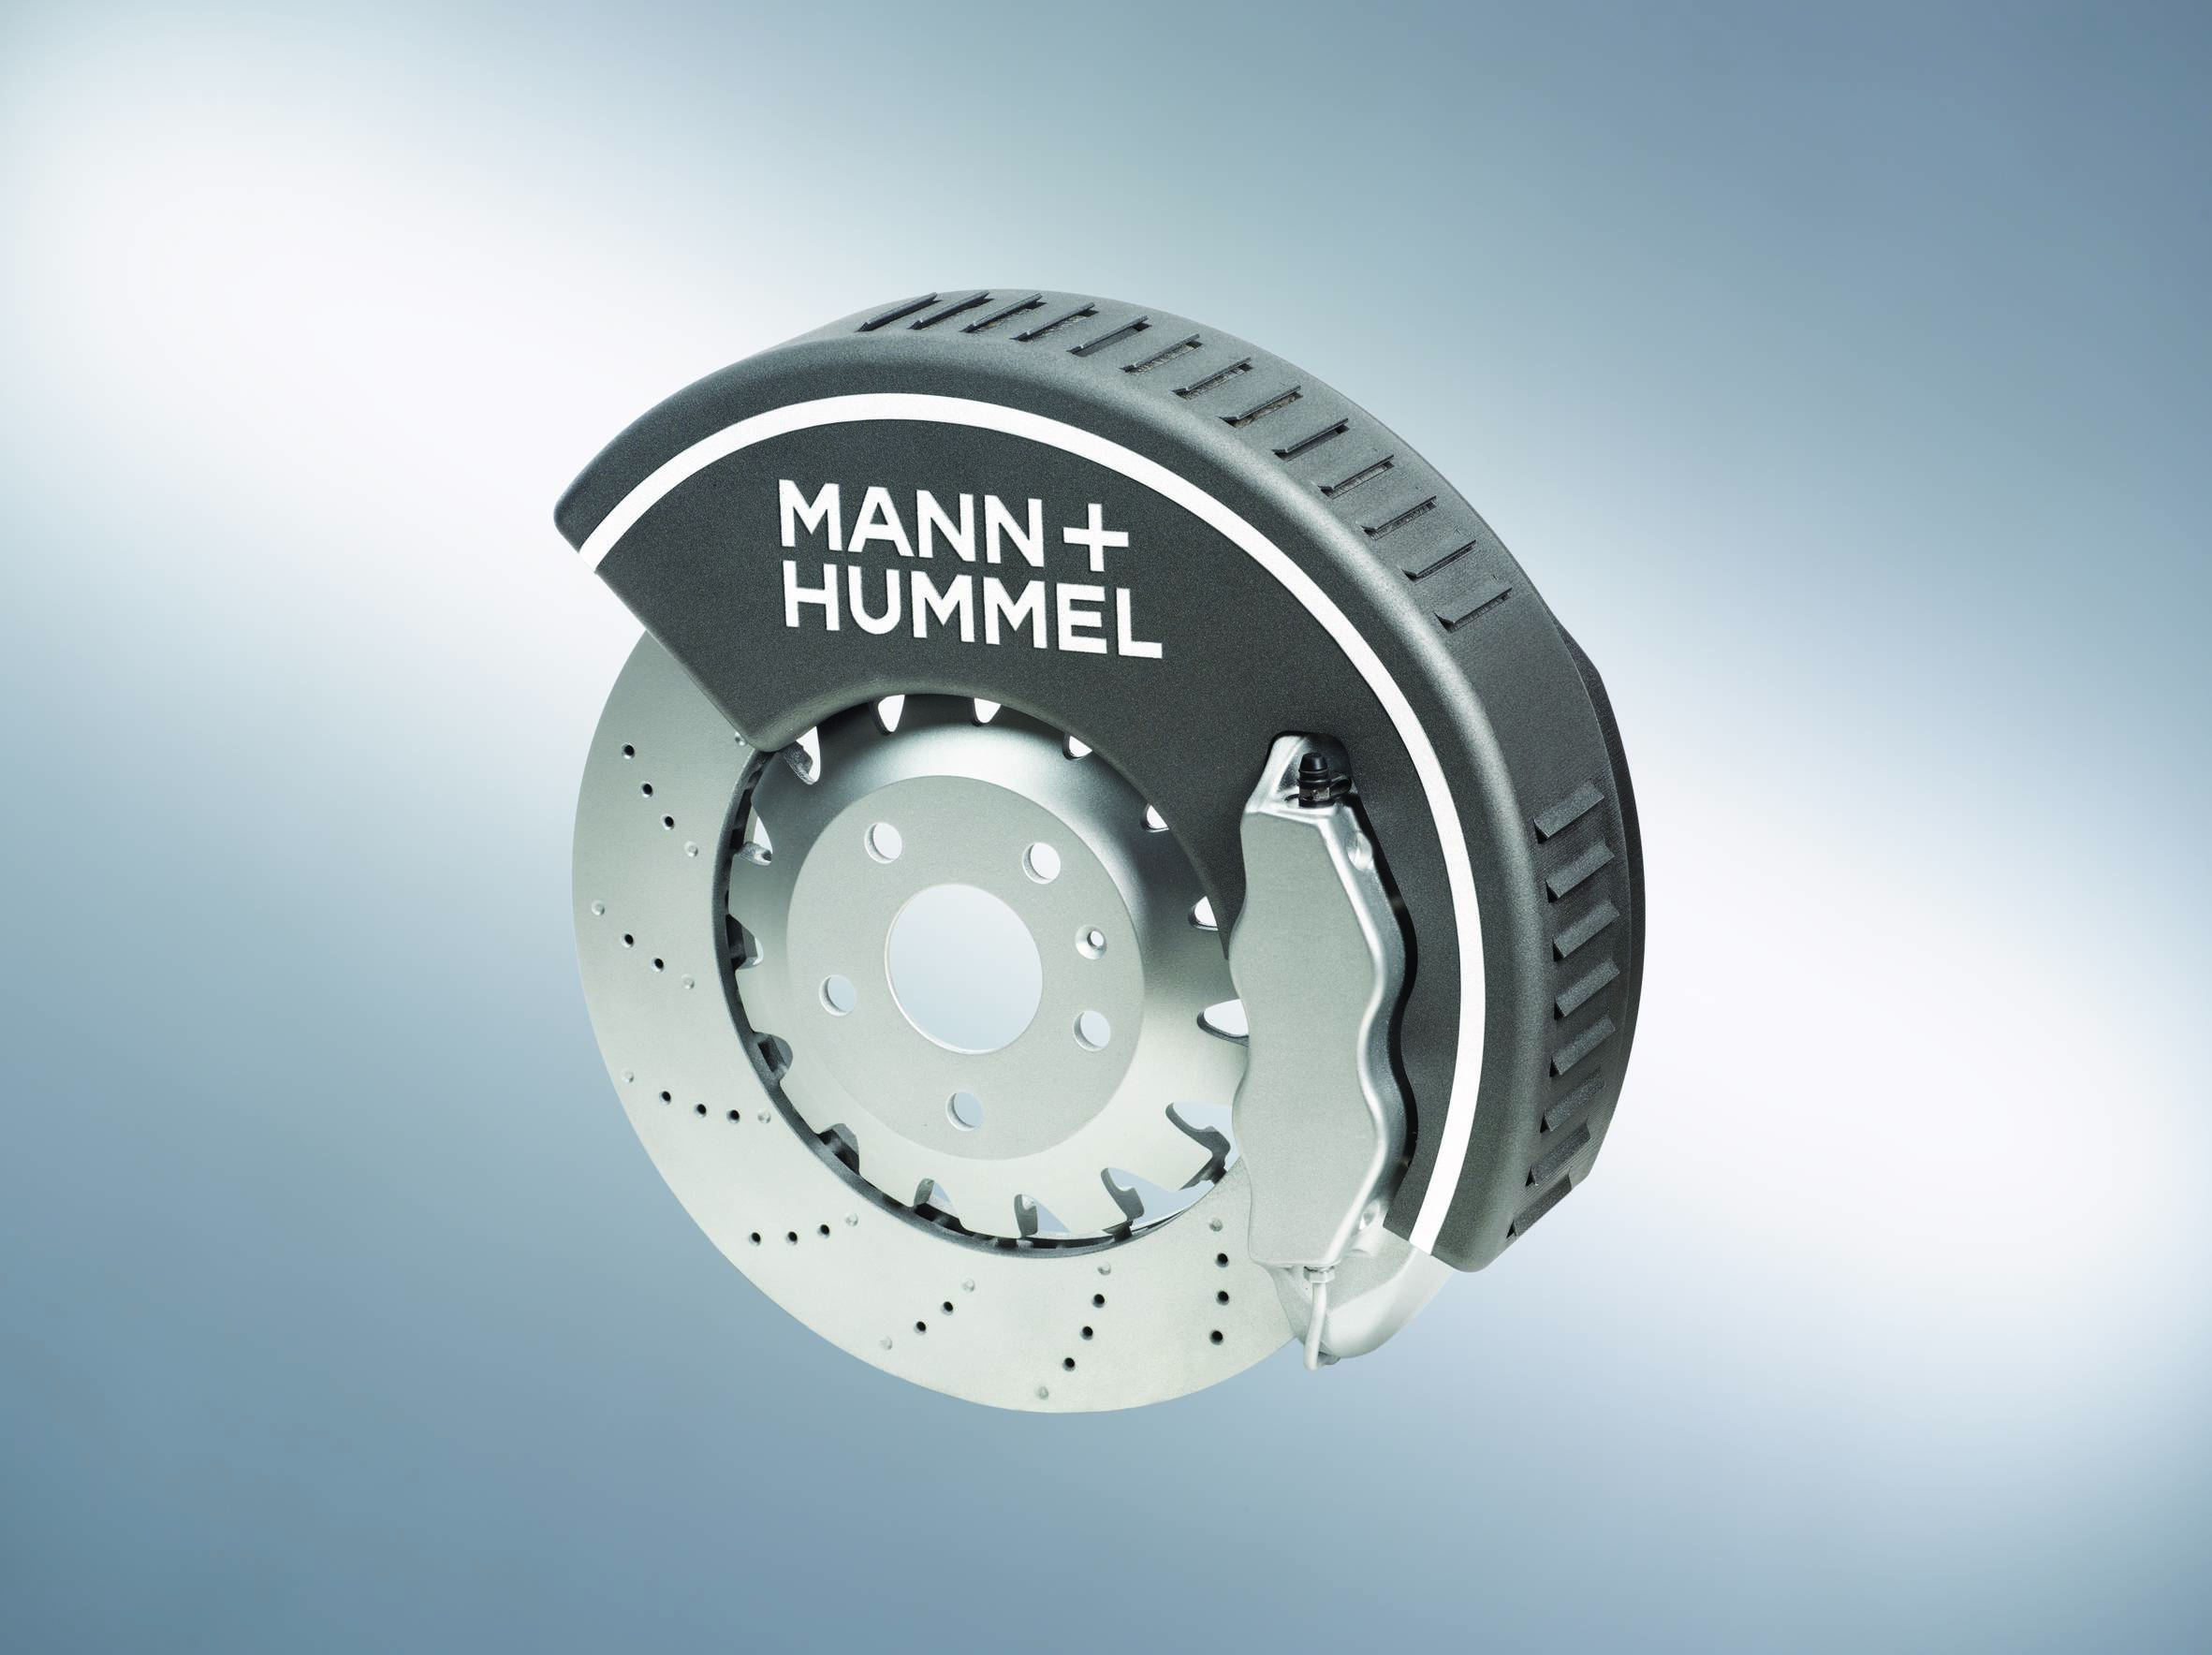 The filter can be adapted to existing installation space in the area of the brake disc.